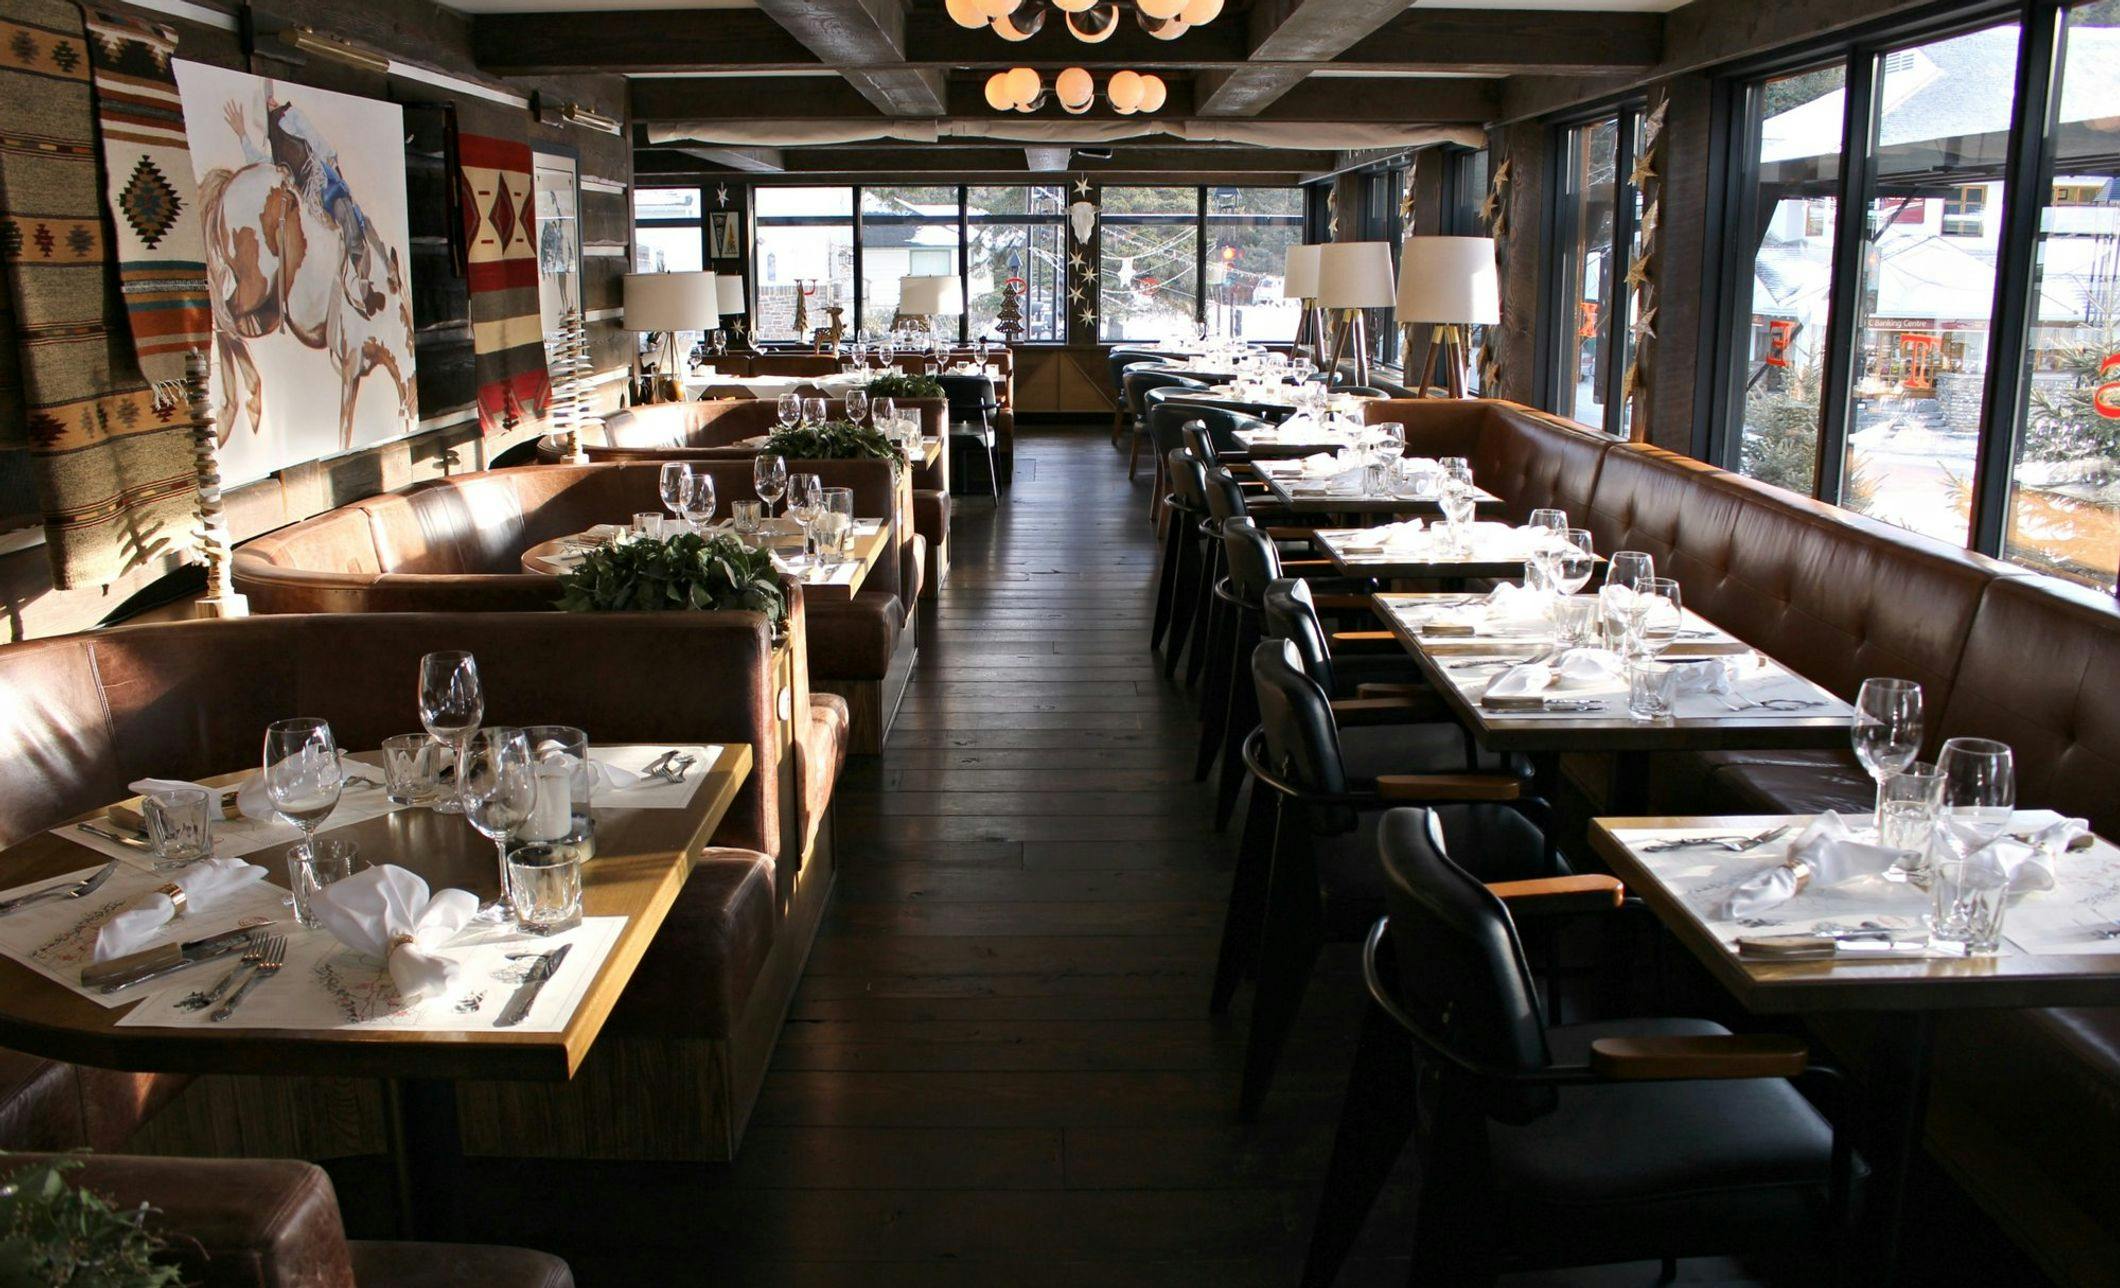 A restaurant interior with tables set for dinner and snowy rooftops outside the windows